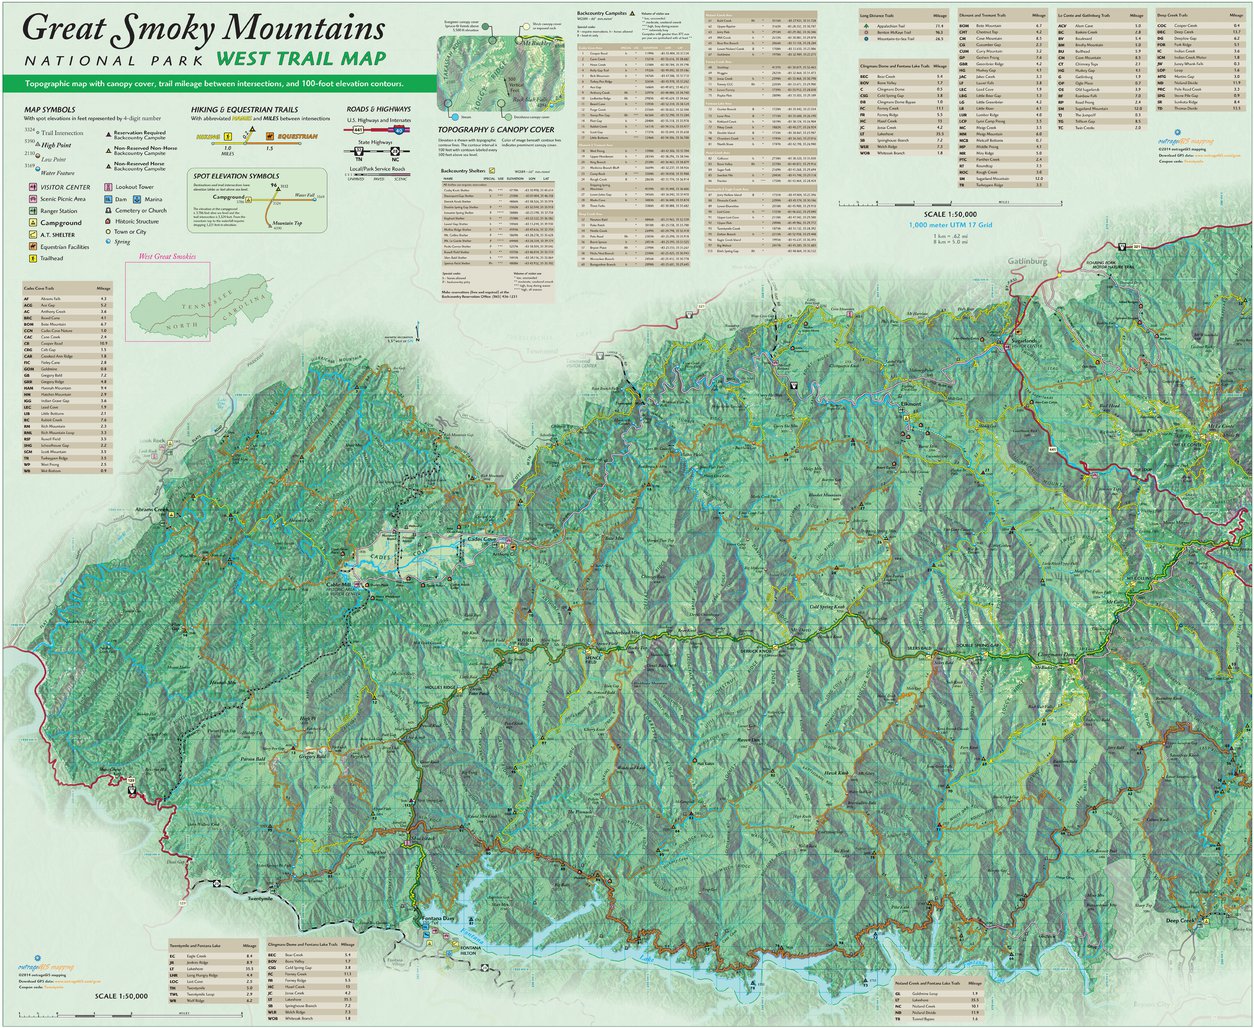 Great Smoky Mountains National by National Geographic Maps